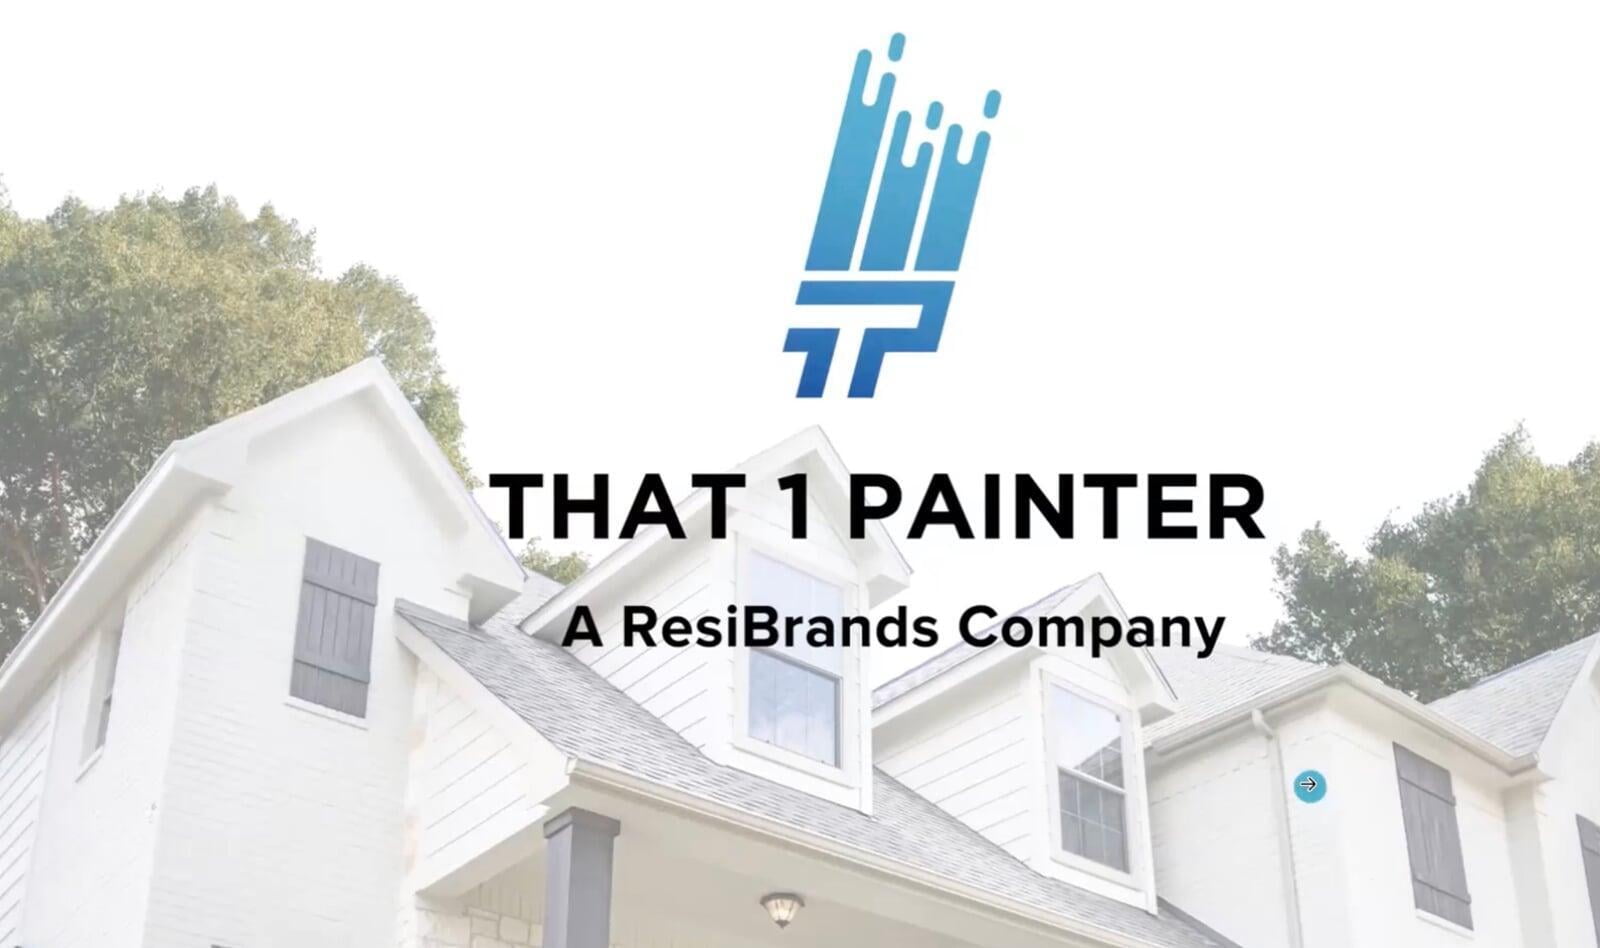 Join The Fastest Growing Painting Franchise - That 1 Painter